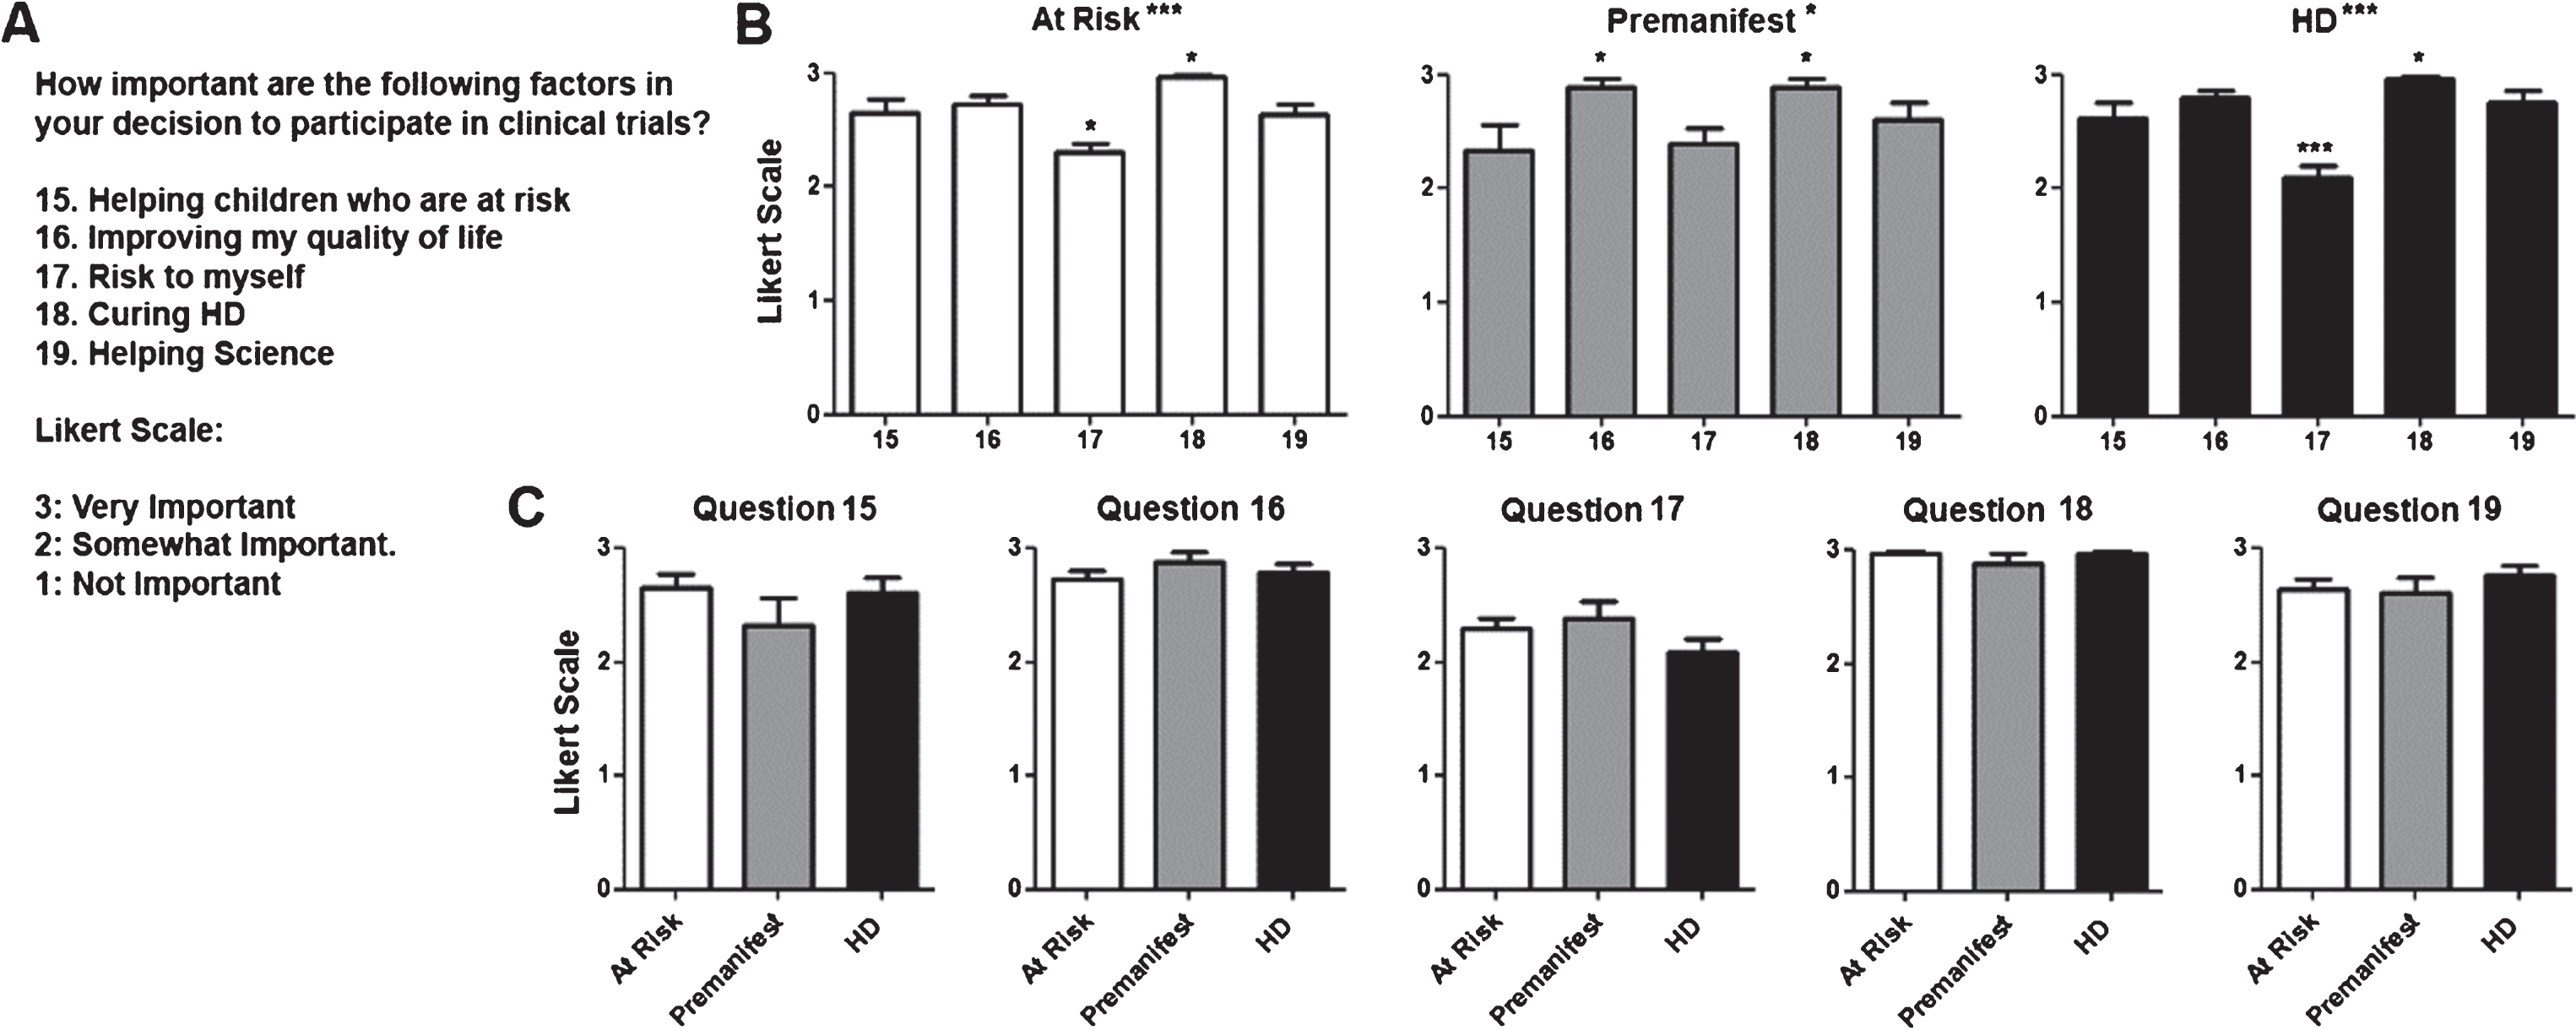 Factors that influence decision to participate in clinical trials. A) Questions regarding decision to participate in and Likert scale with potential answers and numerical values assigned to each answer. B) Average score for questions per diagnostic group. Numerical values for questions in the X axis correlate with those shown in (A). C) Average score for each individual question for each. Difference between questions (A) or groups (C) were calculated using ANOVA (when present, significance noted in the title above each graph) with Dunnett pot-test comparison of all versus the first column (when present, significance noted above each column). *p < 0.05; **p < 0.01; ***p < 0.001.